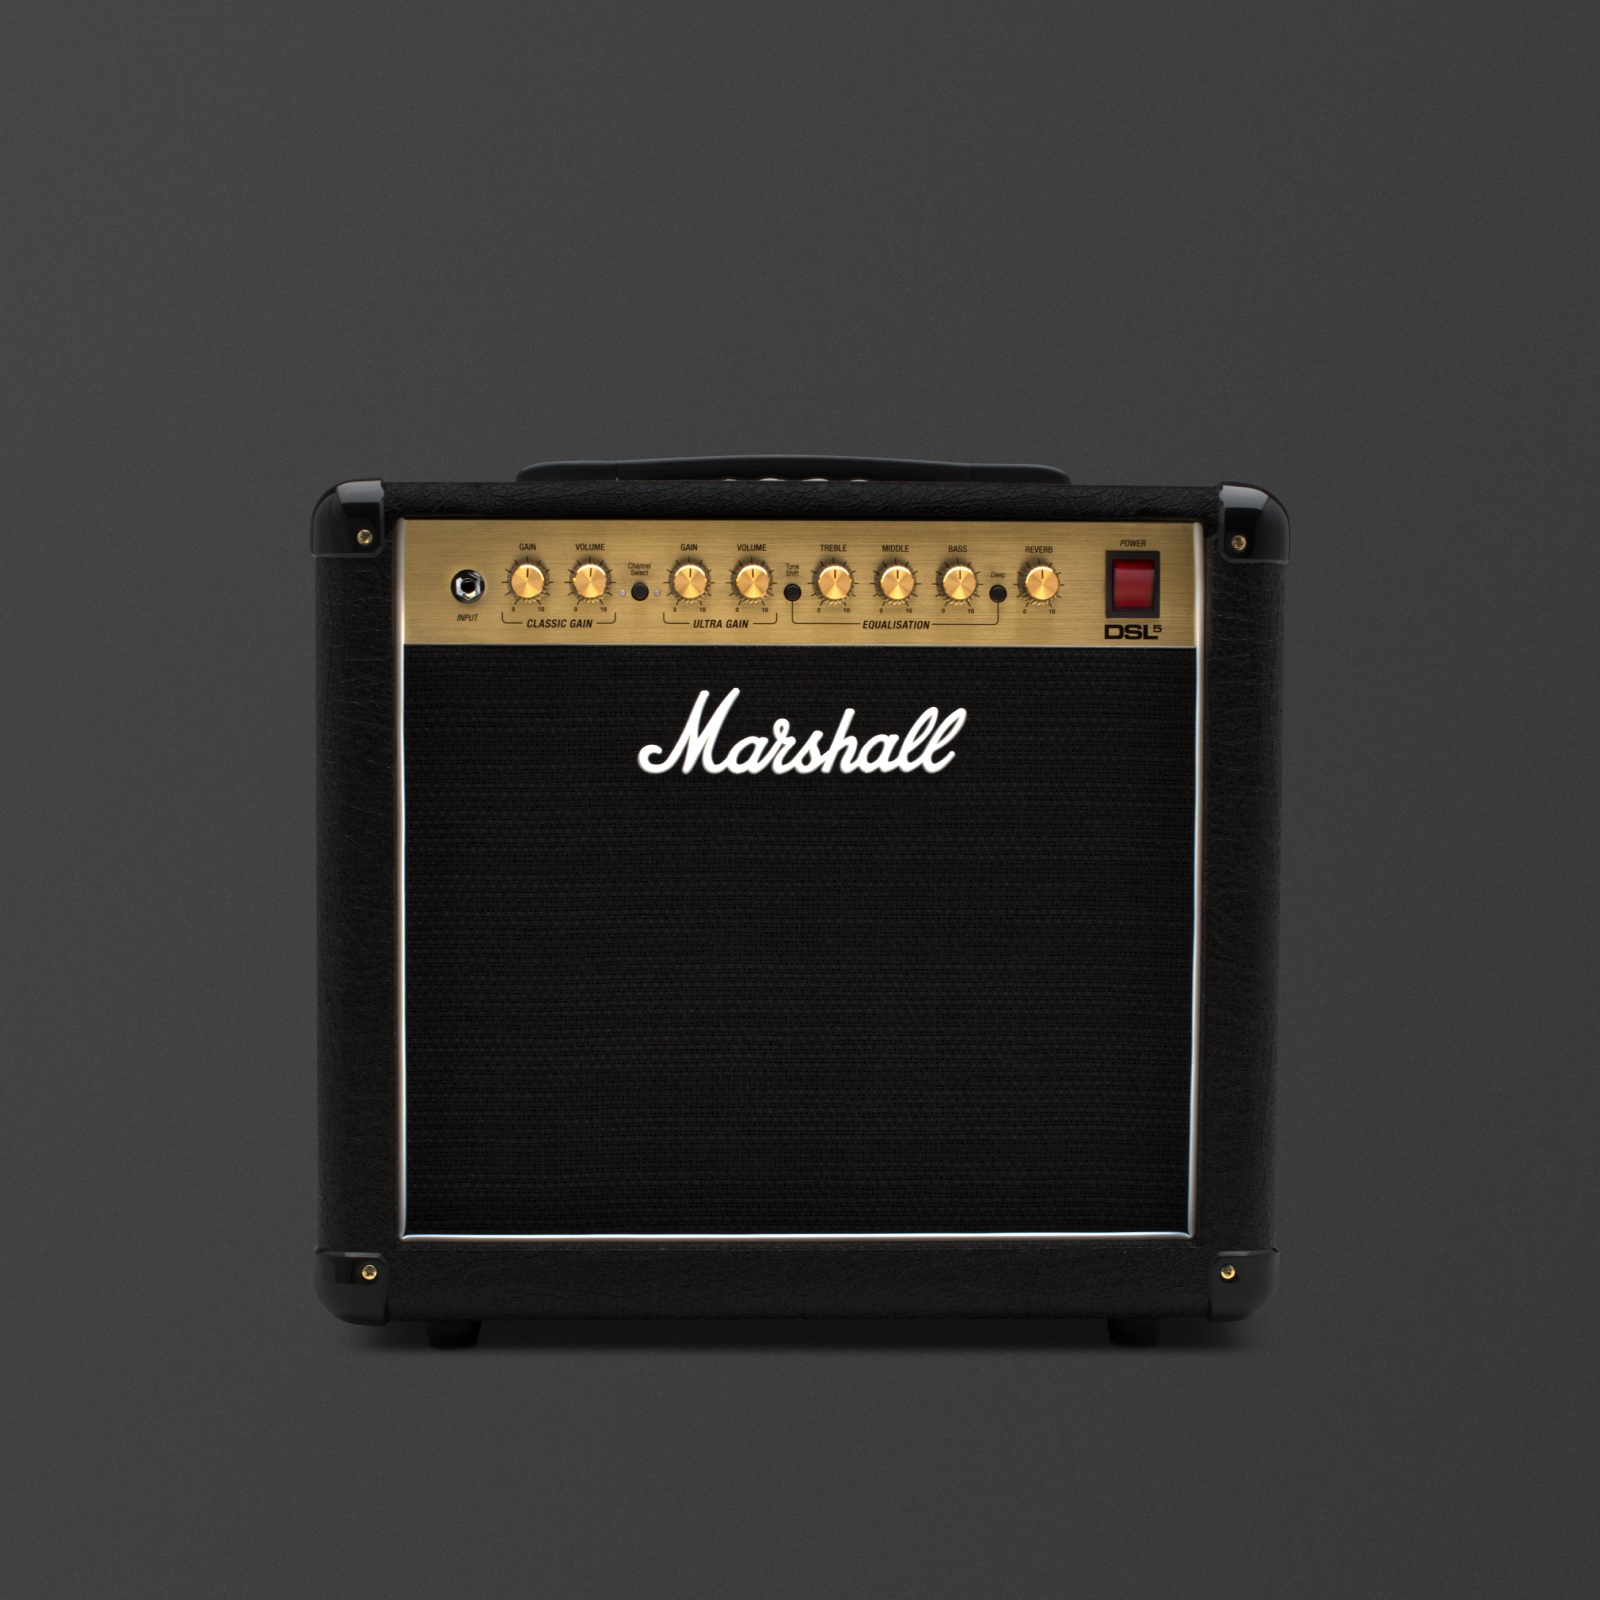 Front facing image of the Marshall DSL5 Combo.